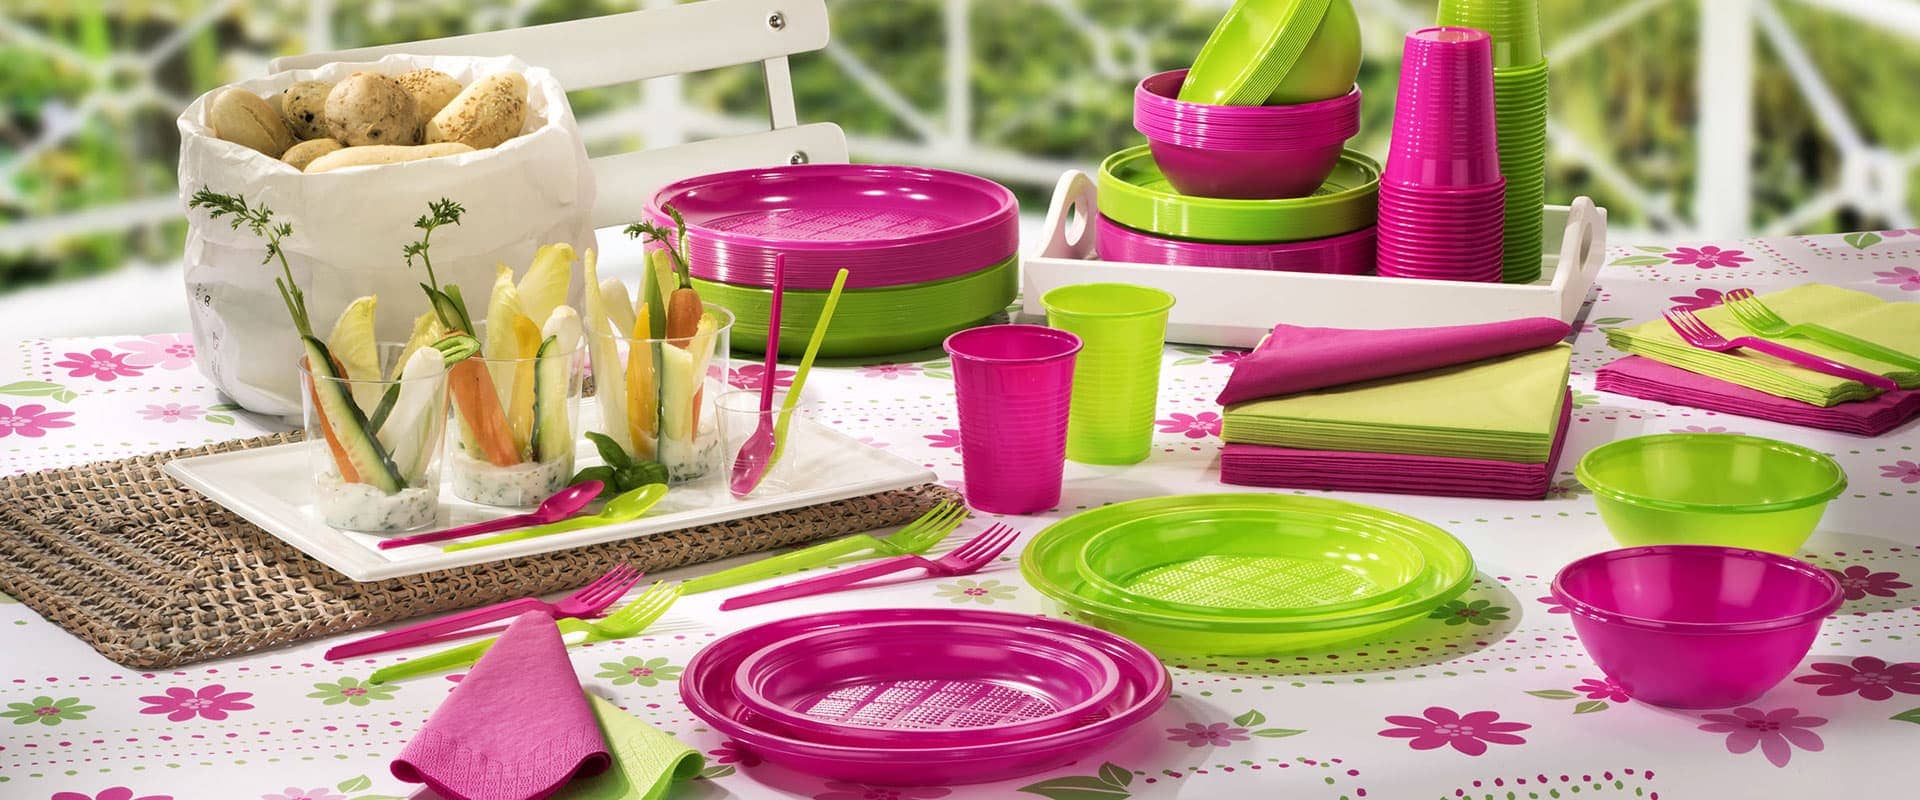 plastic dinnerware sets for camping